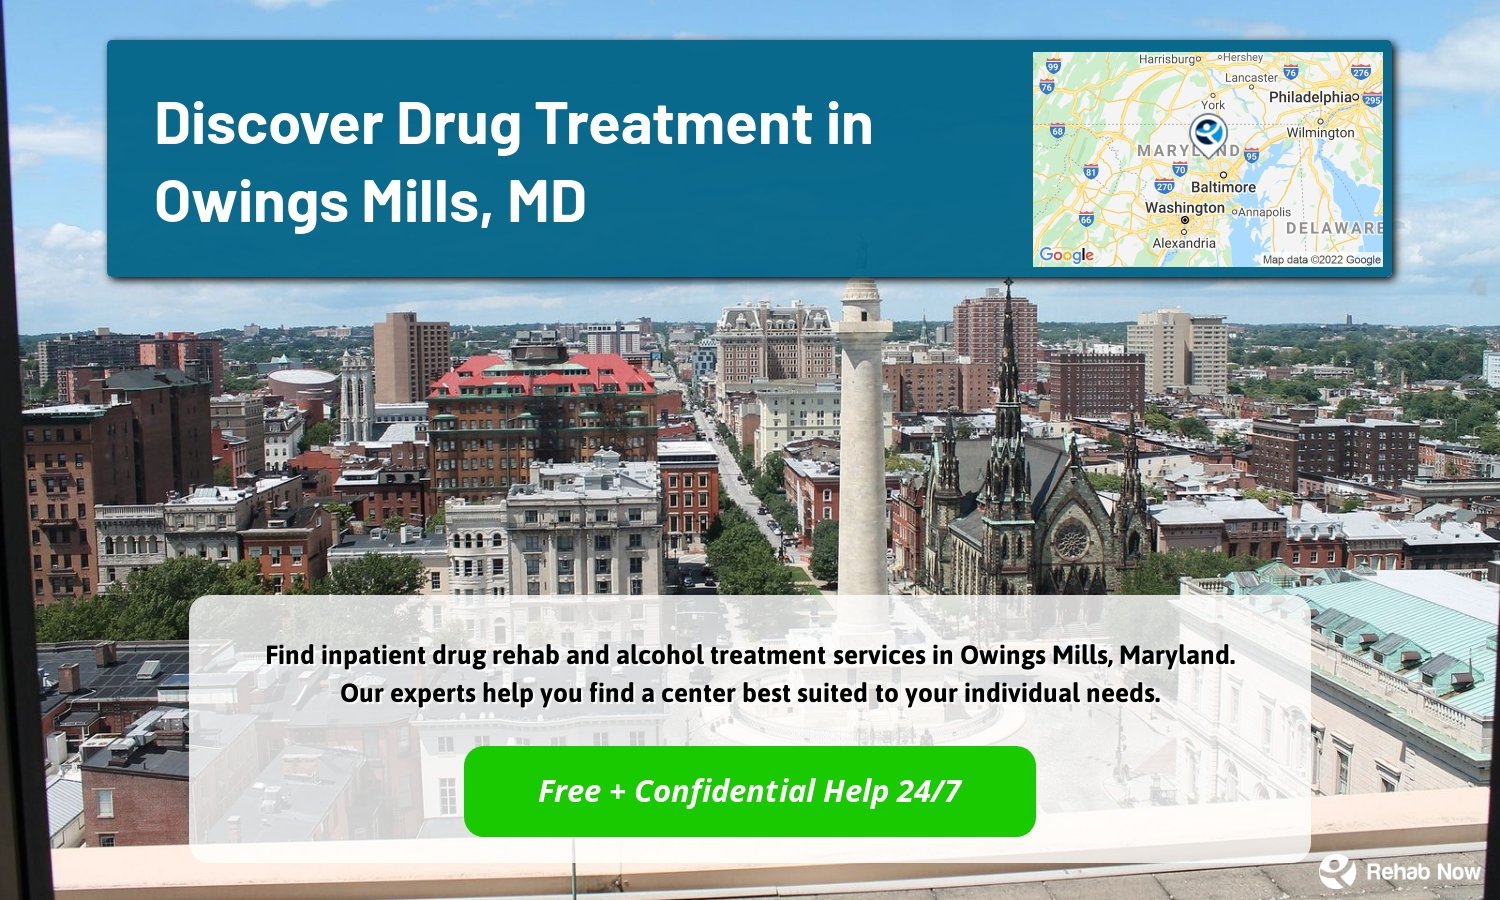 Find inpatient drug rehab and alcohol treatment services in Owings Mills, Maryland. Our experts help you find a center best suited to your individual needs.